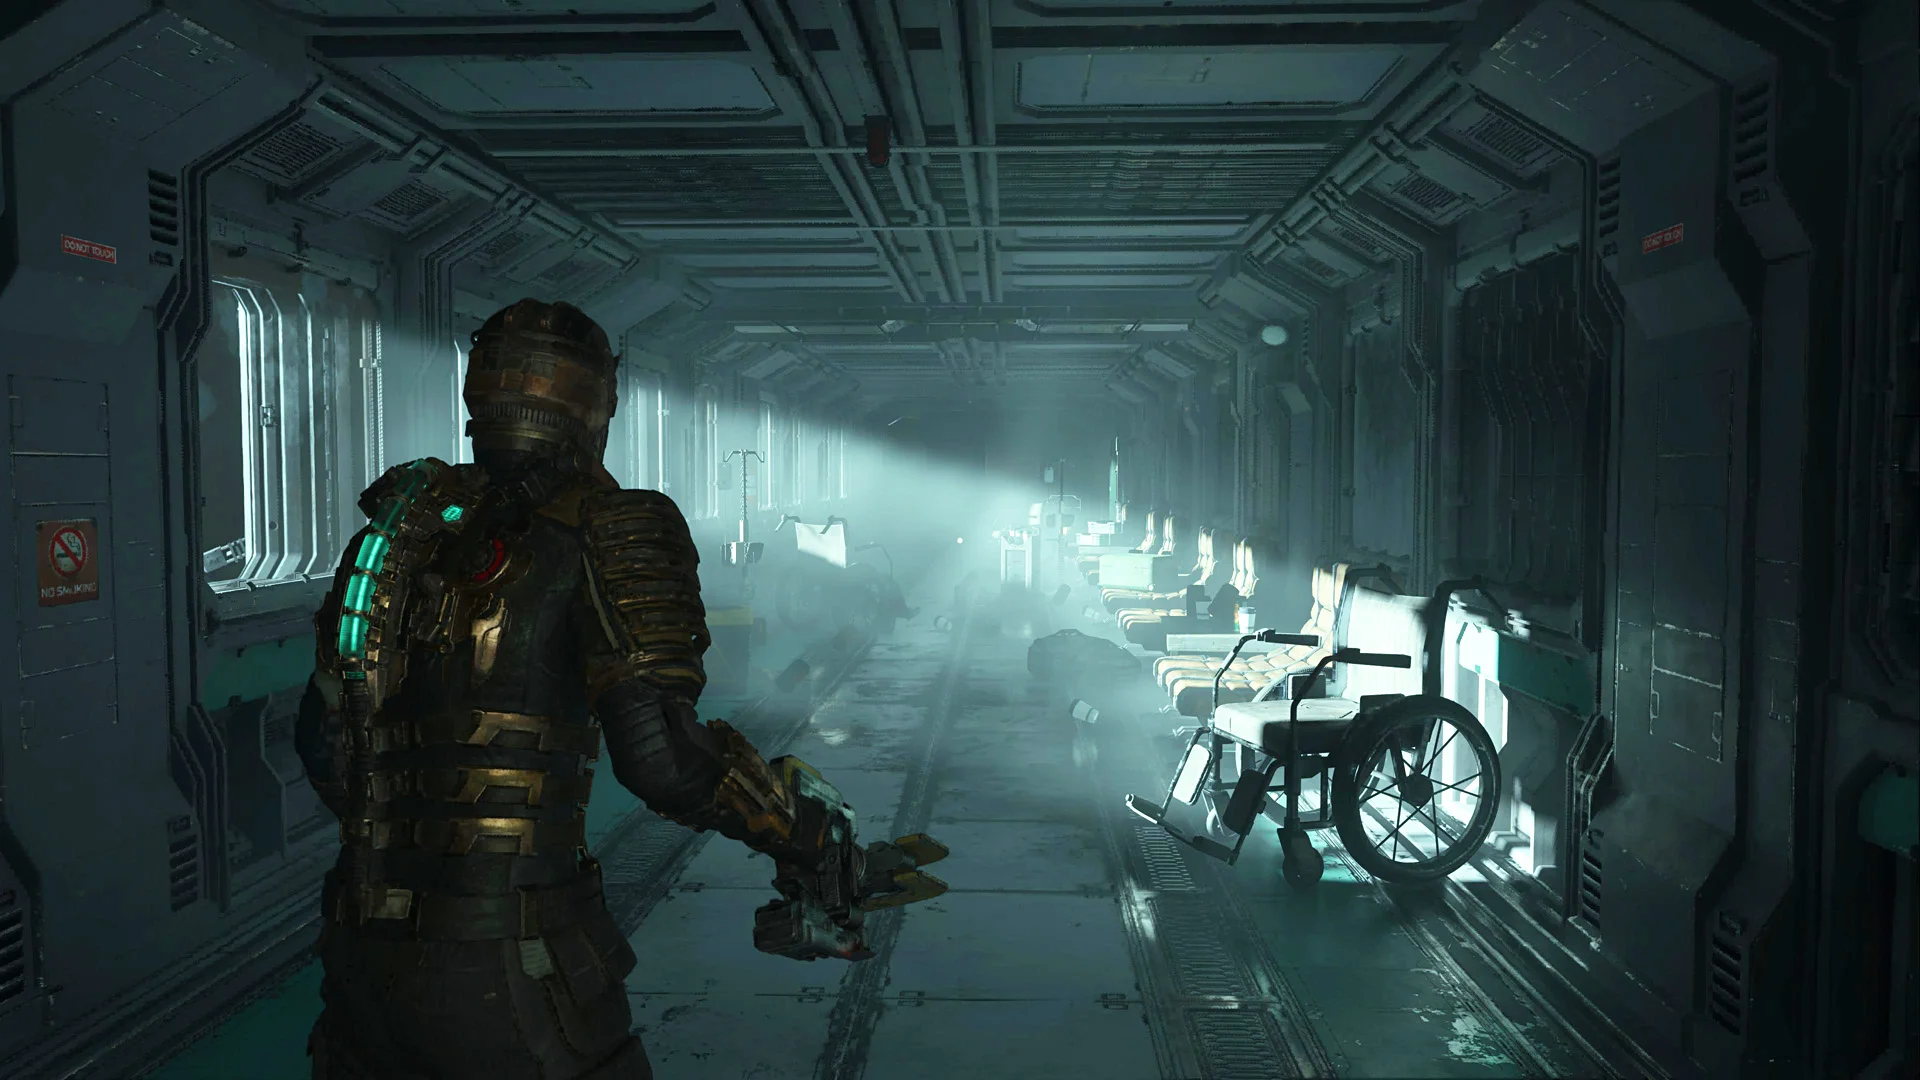 Dead Space Remake PS5 Download Size Revealed